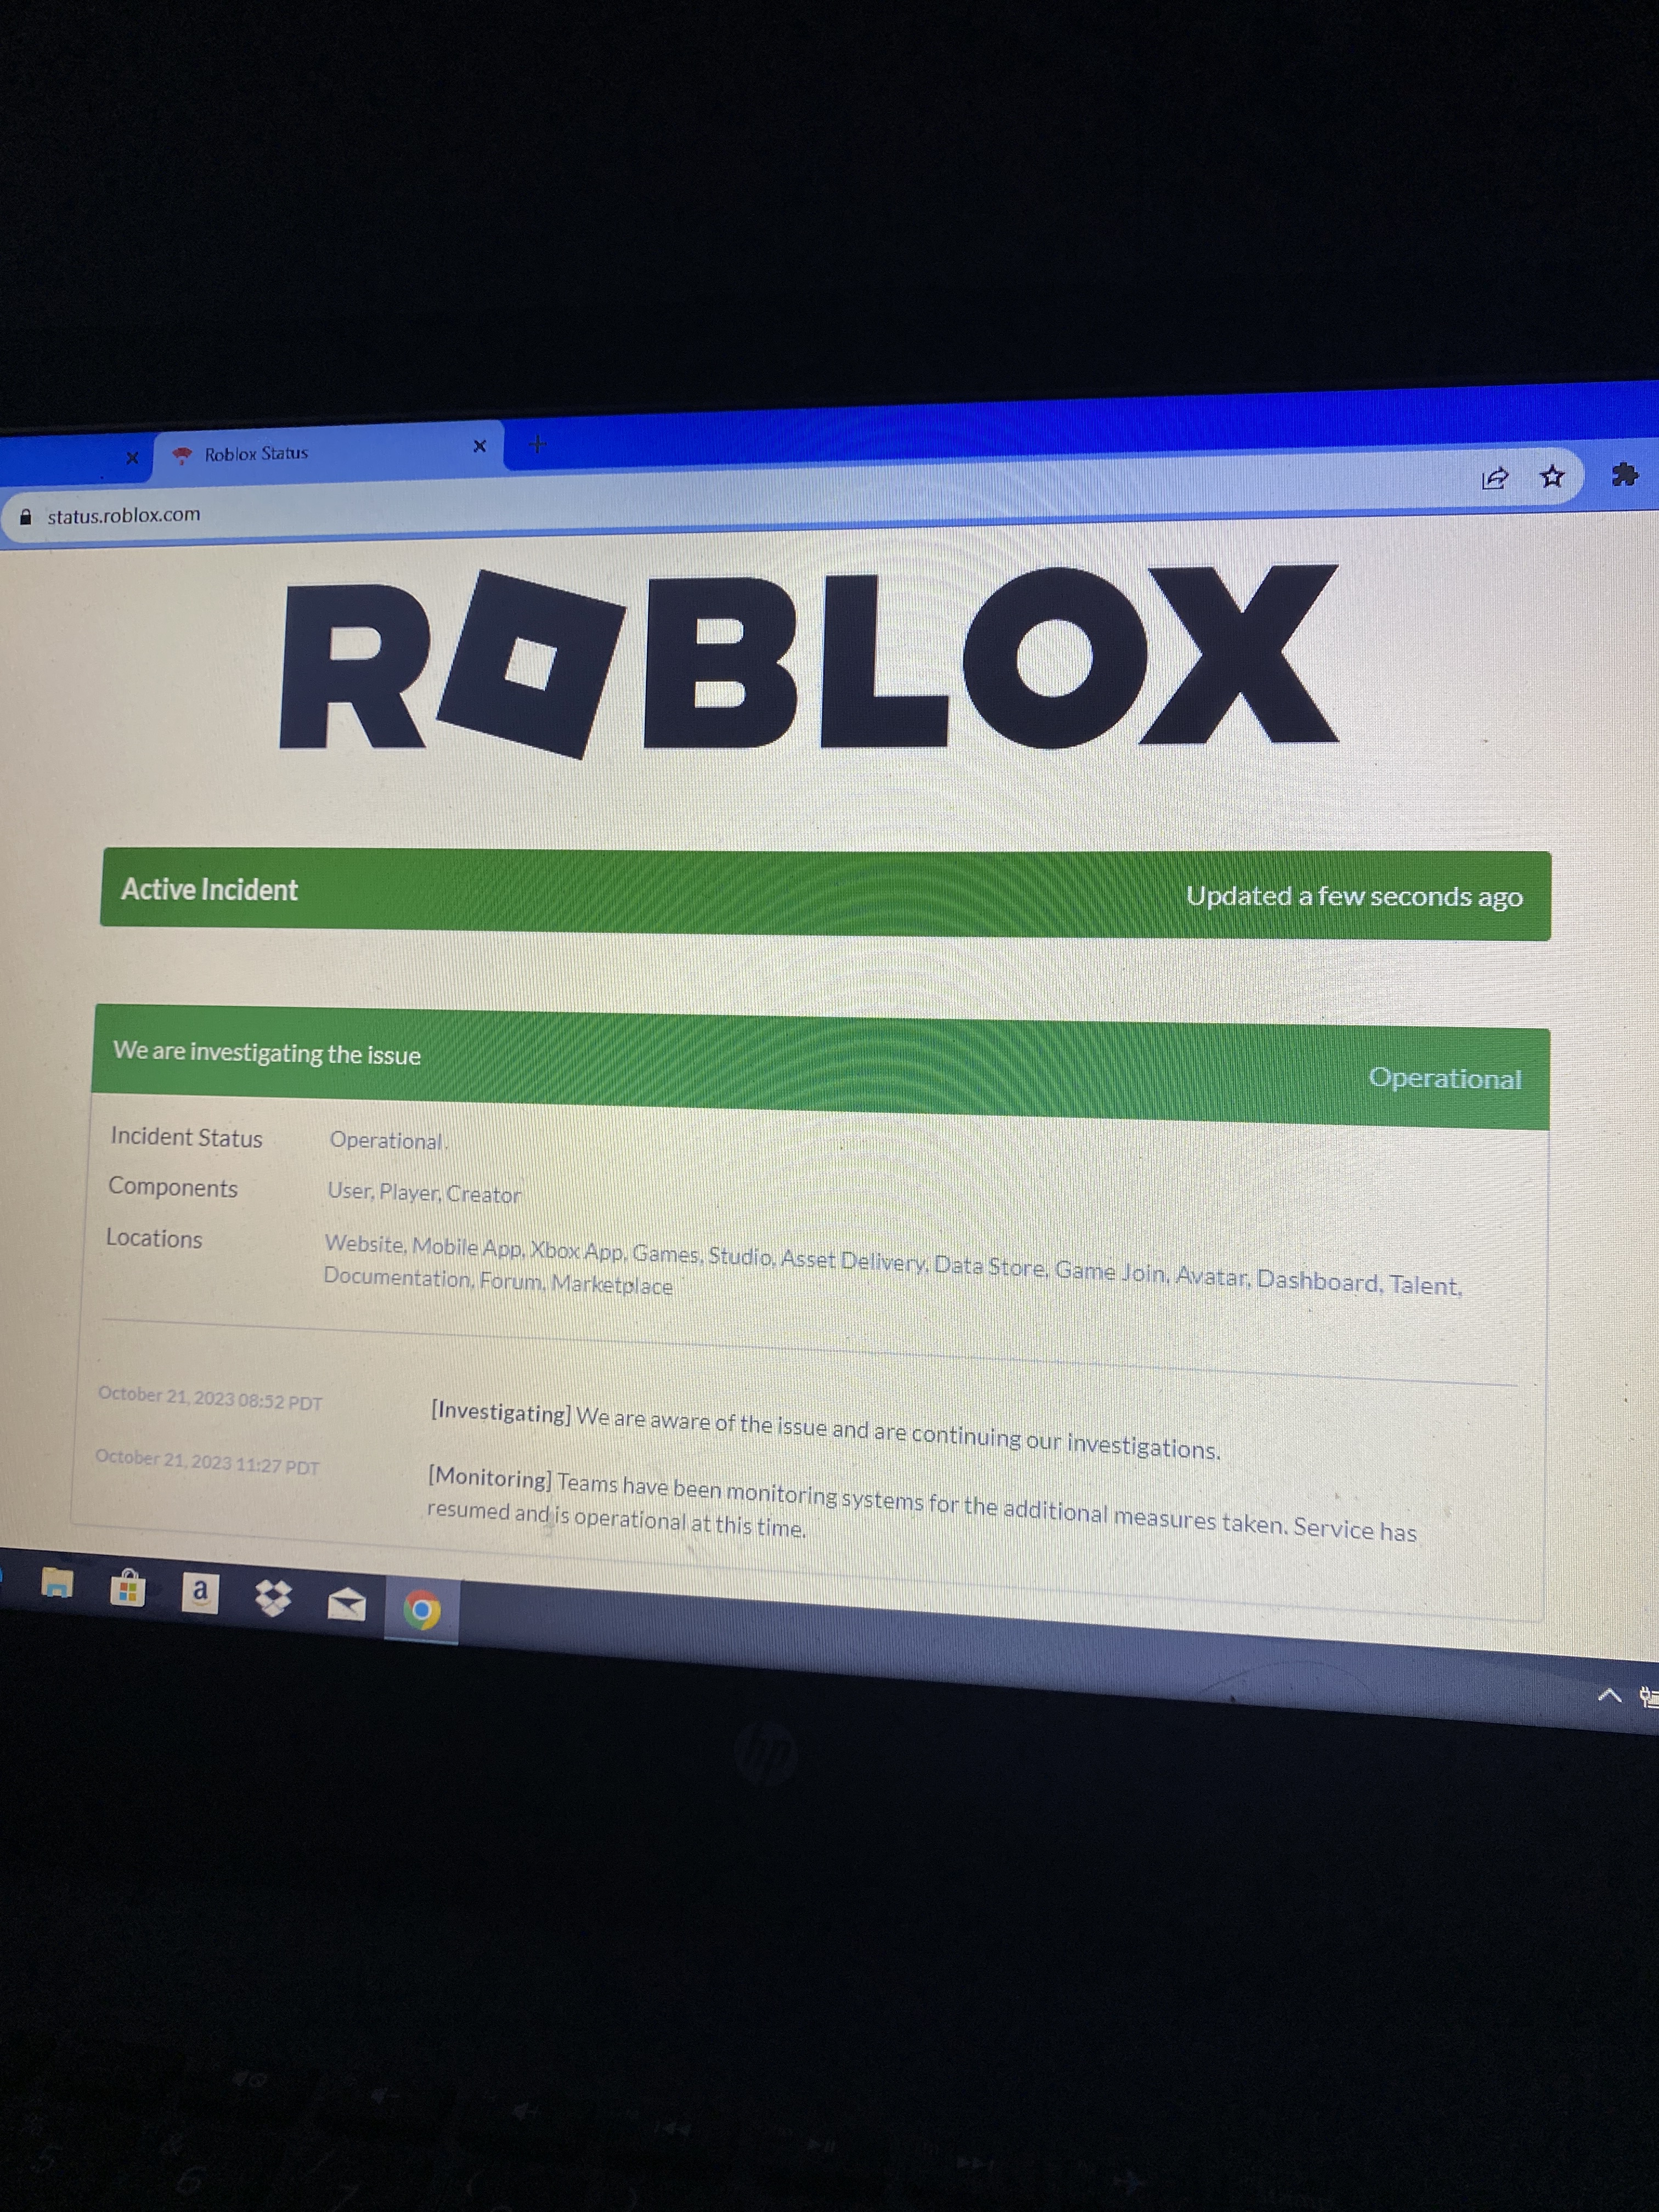 Roblox Status on X: We are investigating the issue. #RobloxDown